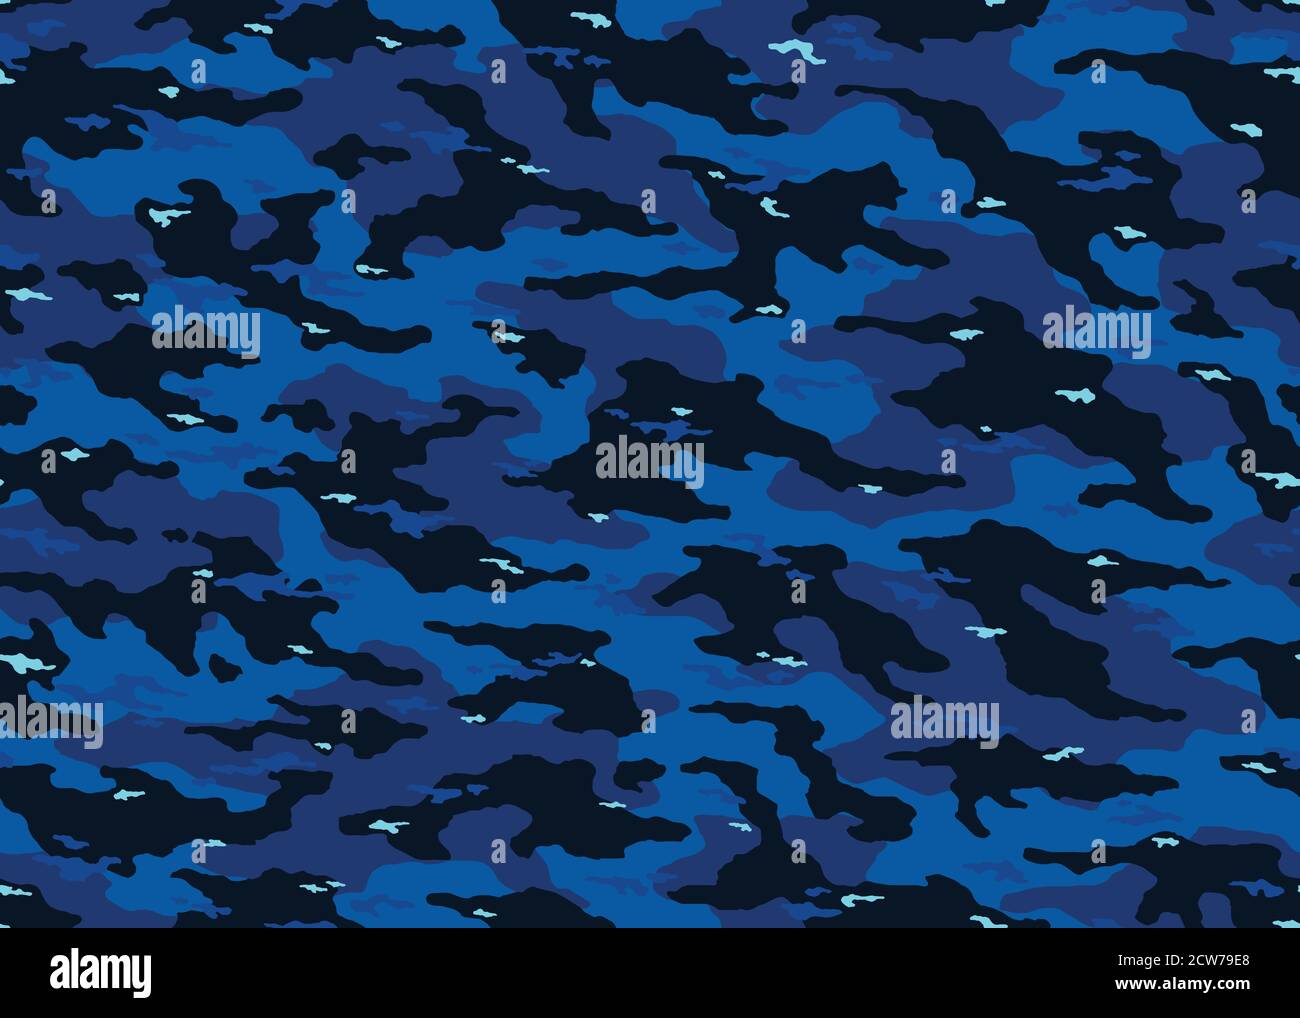 Modern Blue camouflage seamless pattern. Camo vector background illustration for web, banner, backdrop or surface design use Stock Vector